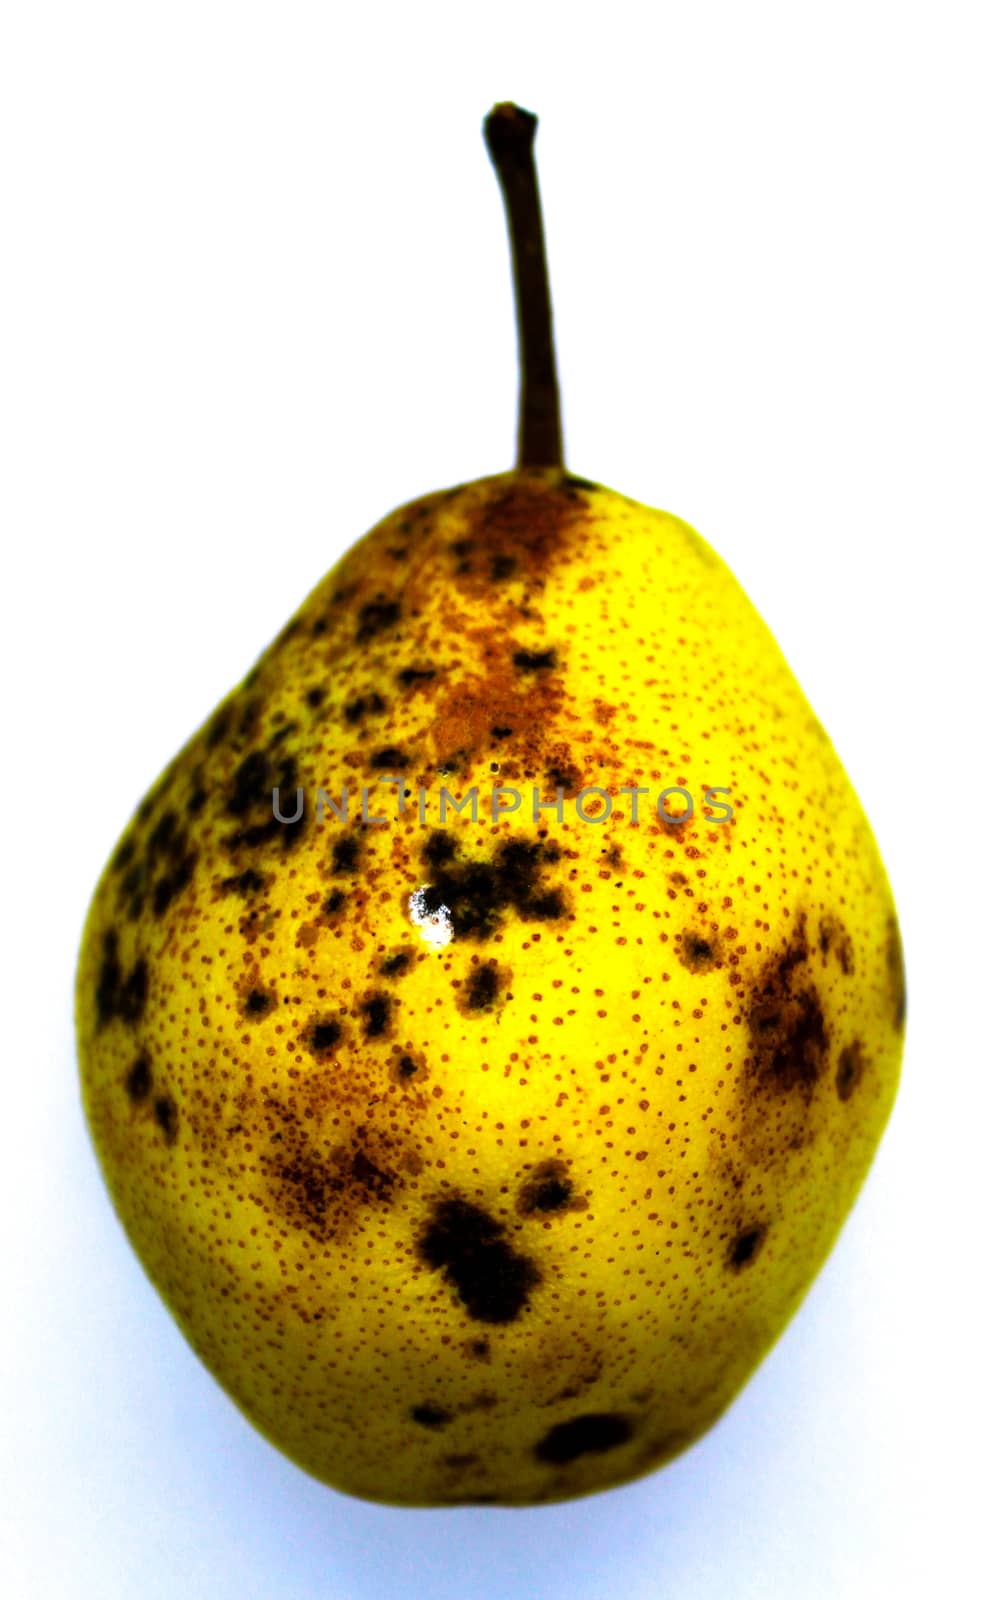 Beautiful yellow pear on white background. Yellow pear with black dots isolated on white background.